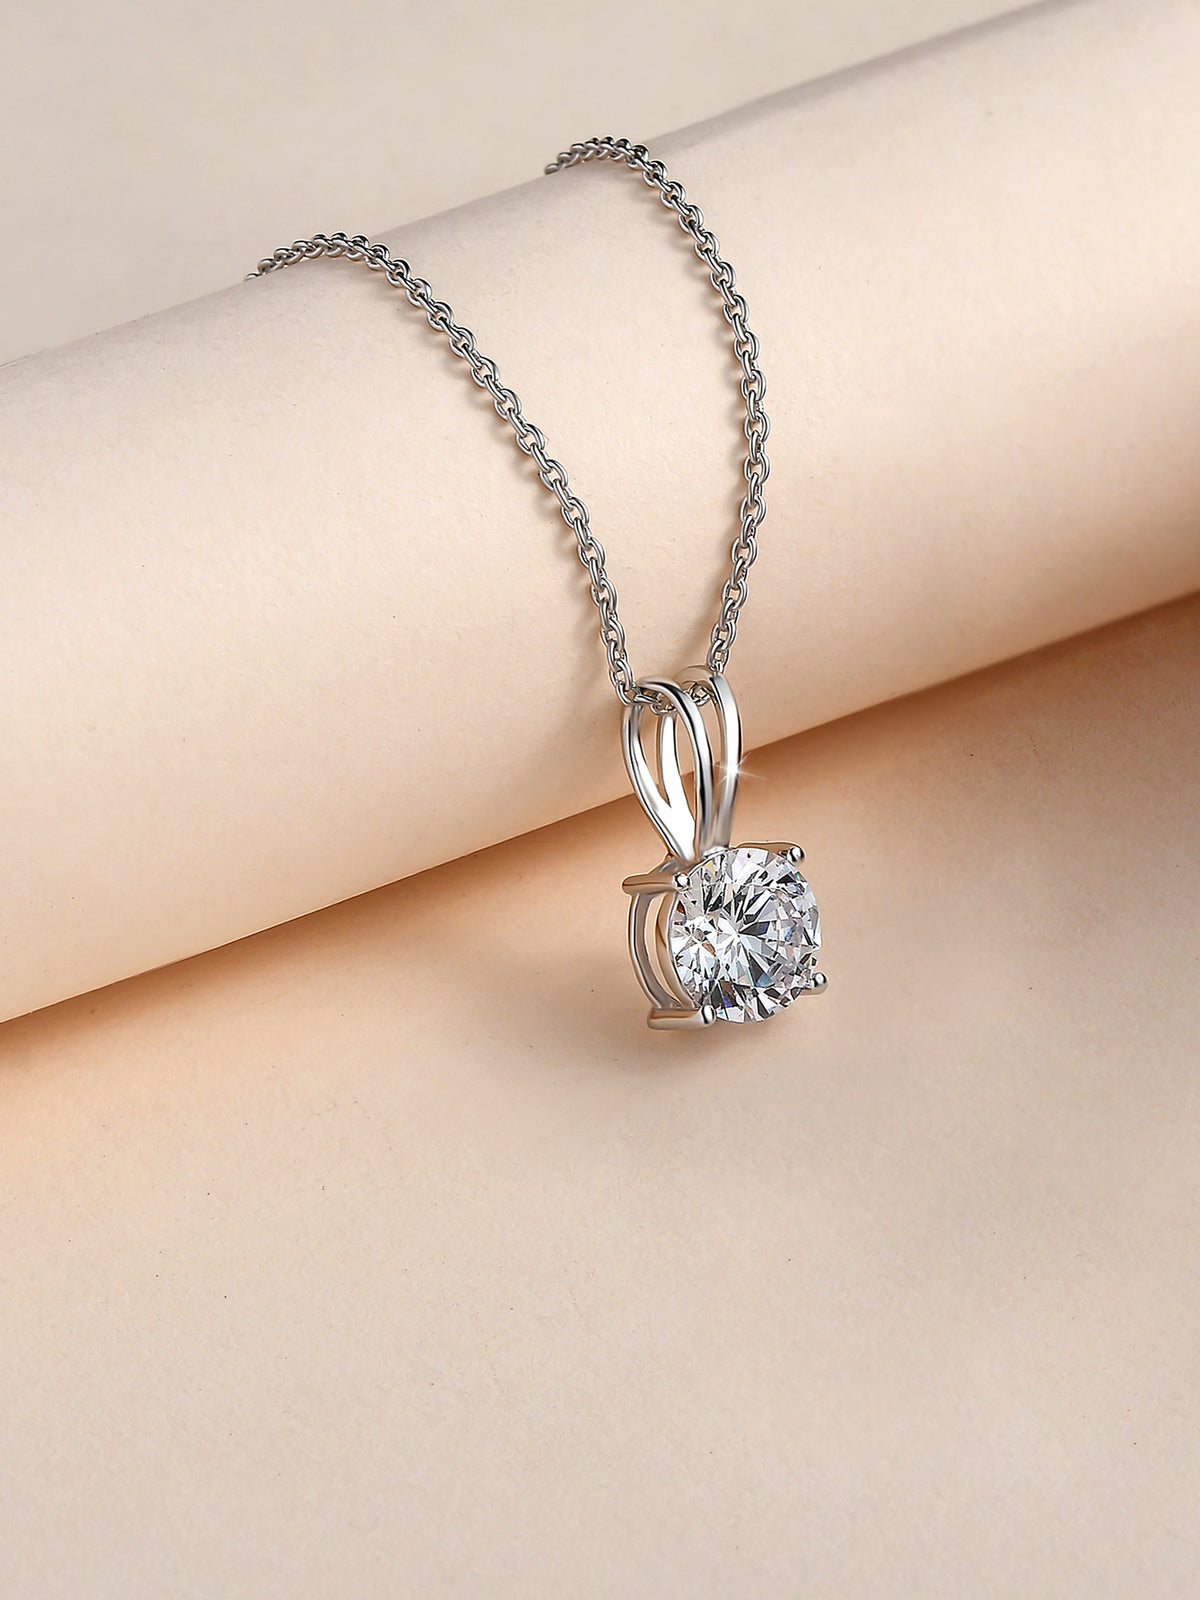 1 Carat Solitaire Pendant Necklace In 925 Sterling Silver For Women-11